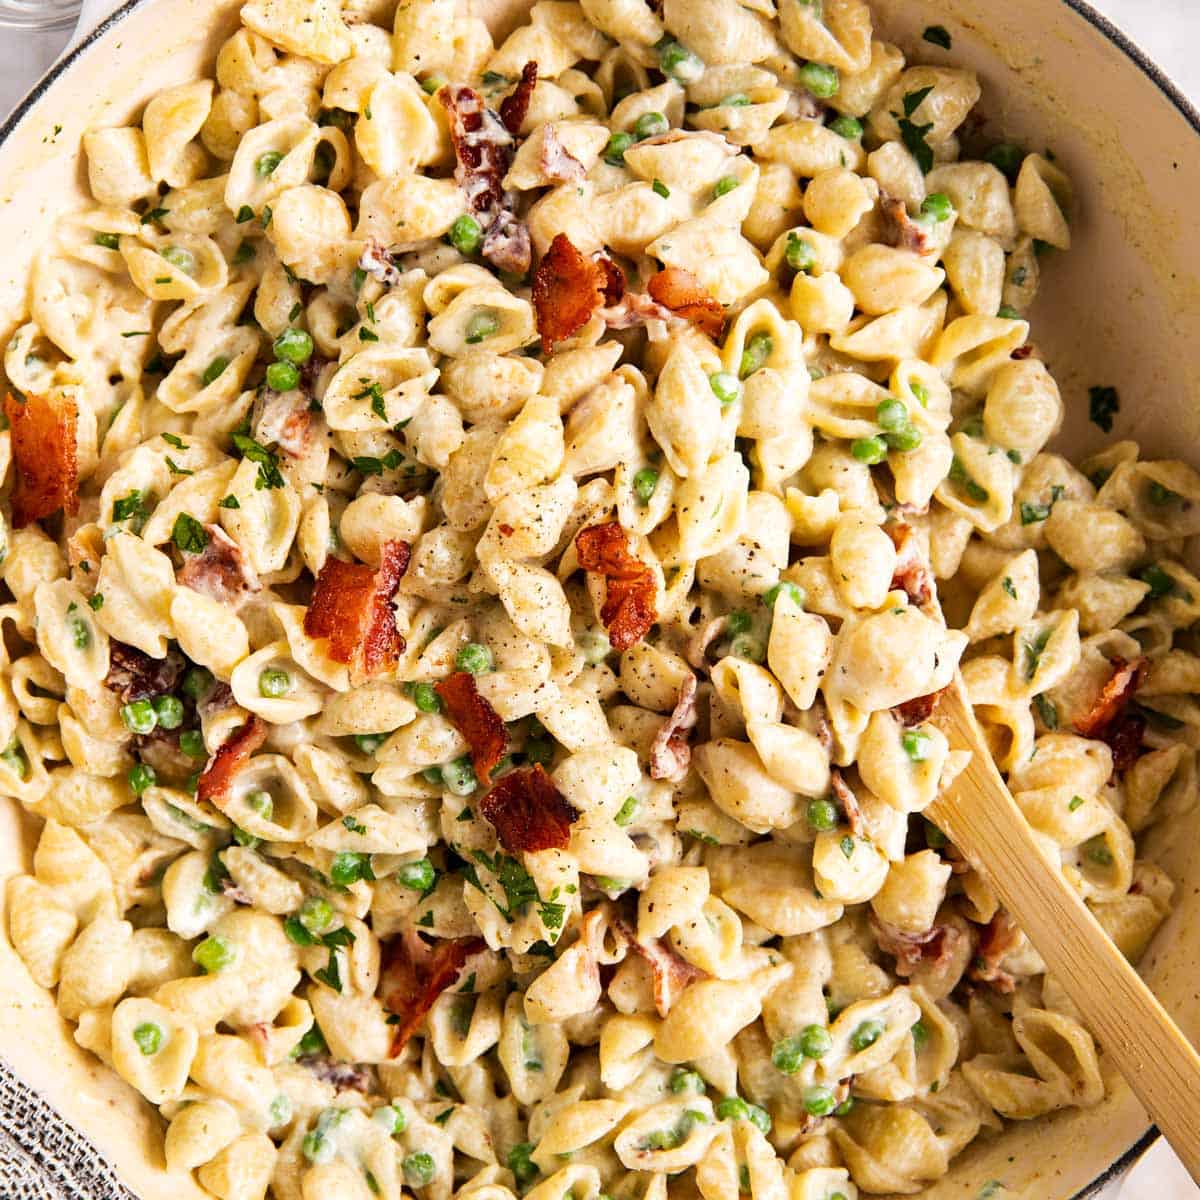 https://www.savorynothings.com/wp-content/uploads/2021/04/pea-and-bacon-pasta-image-sq.jpg